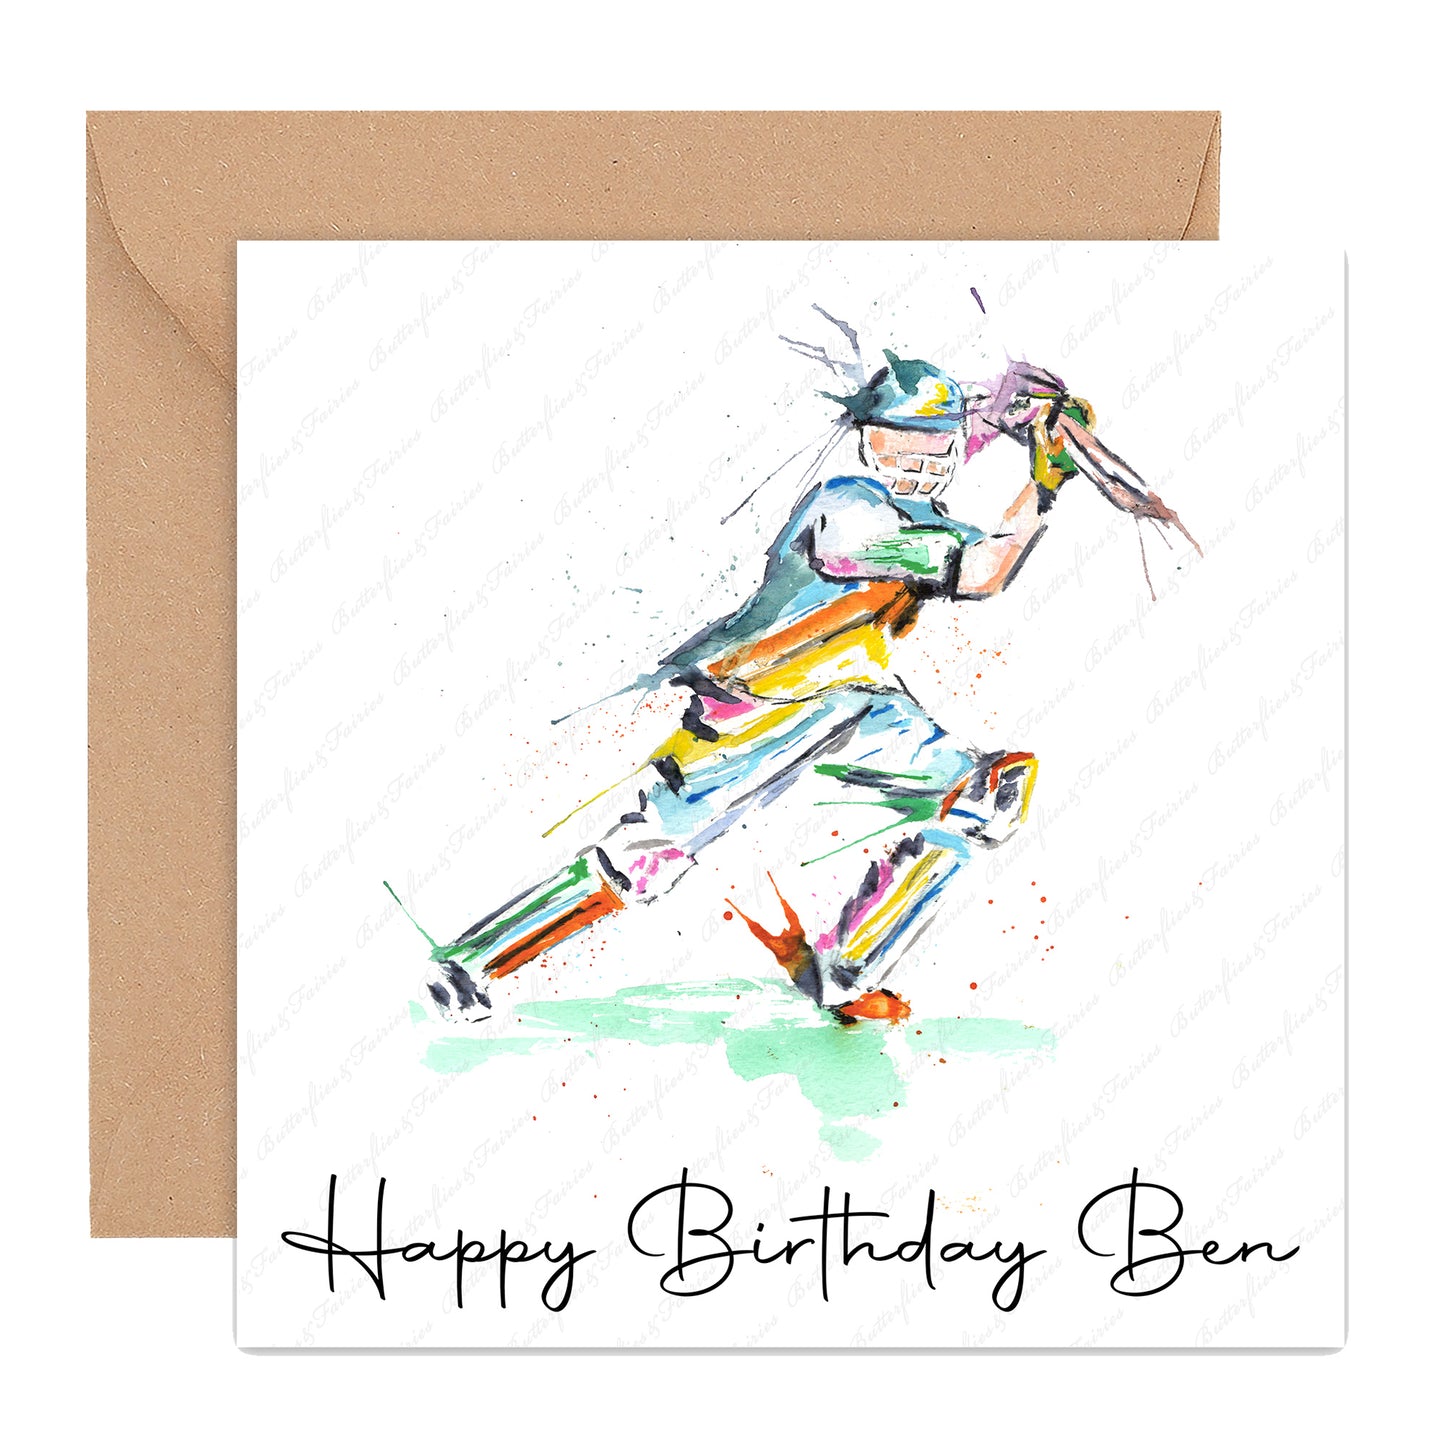 Personalised Cricketer Birthday Card